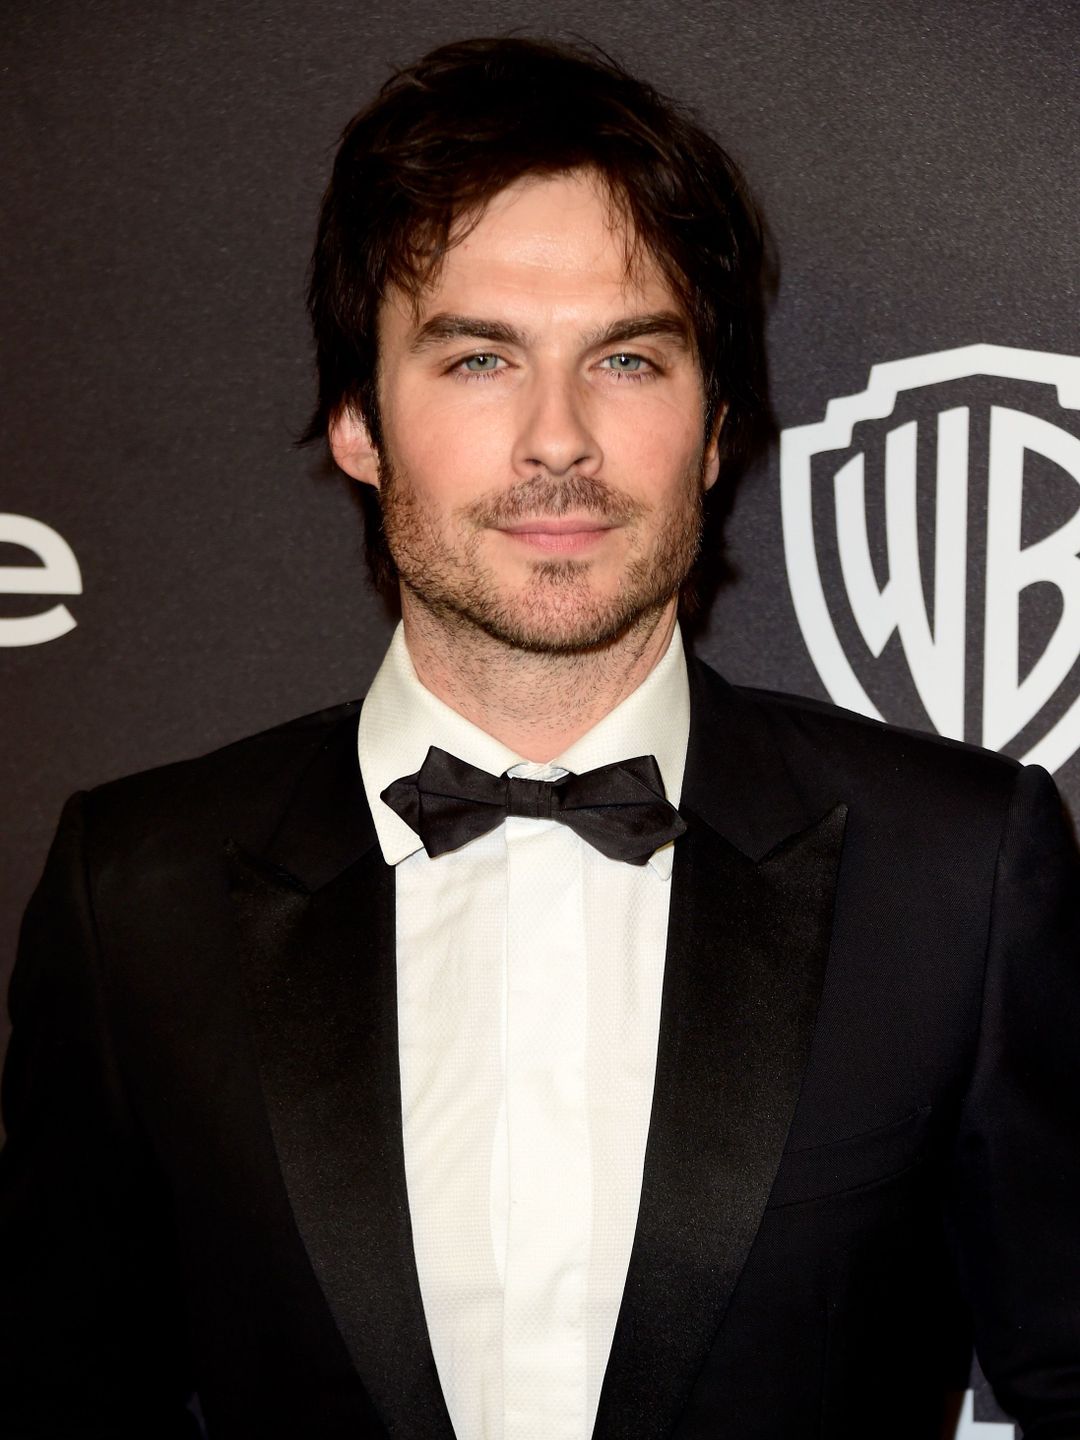 Ian Somerhalder does he have a wife